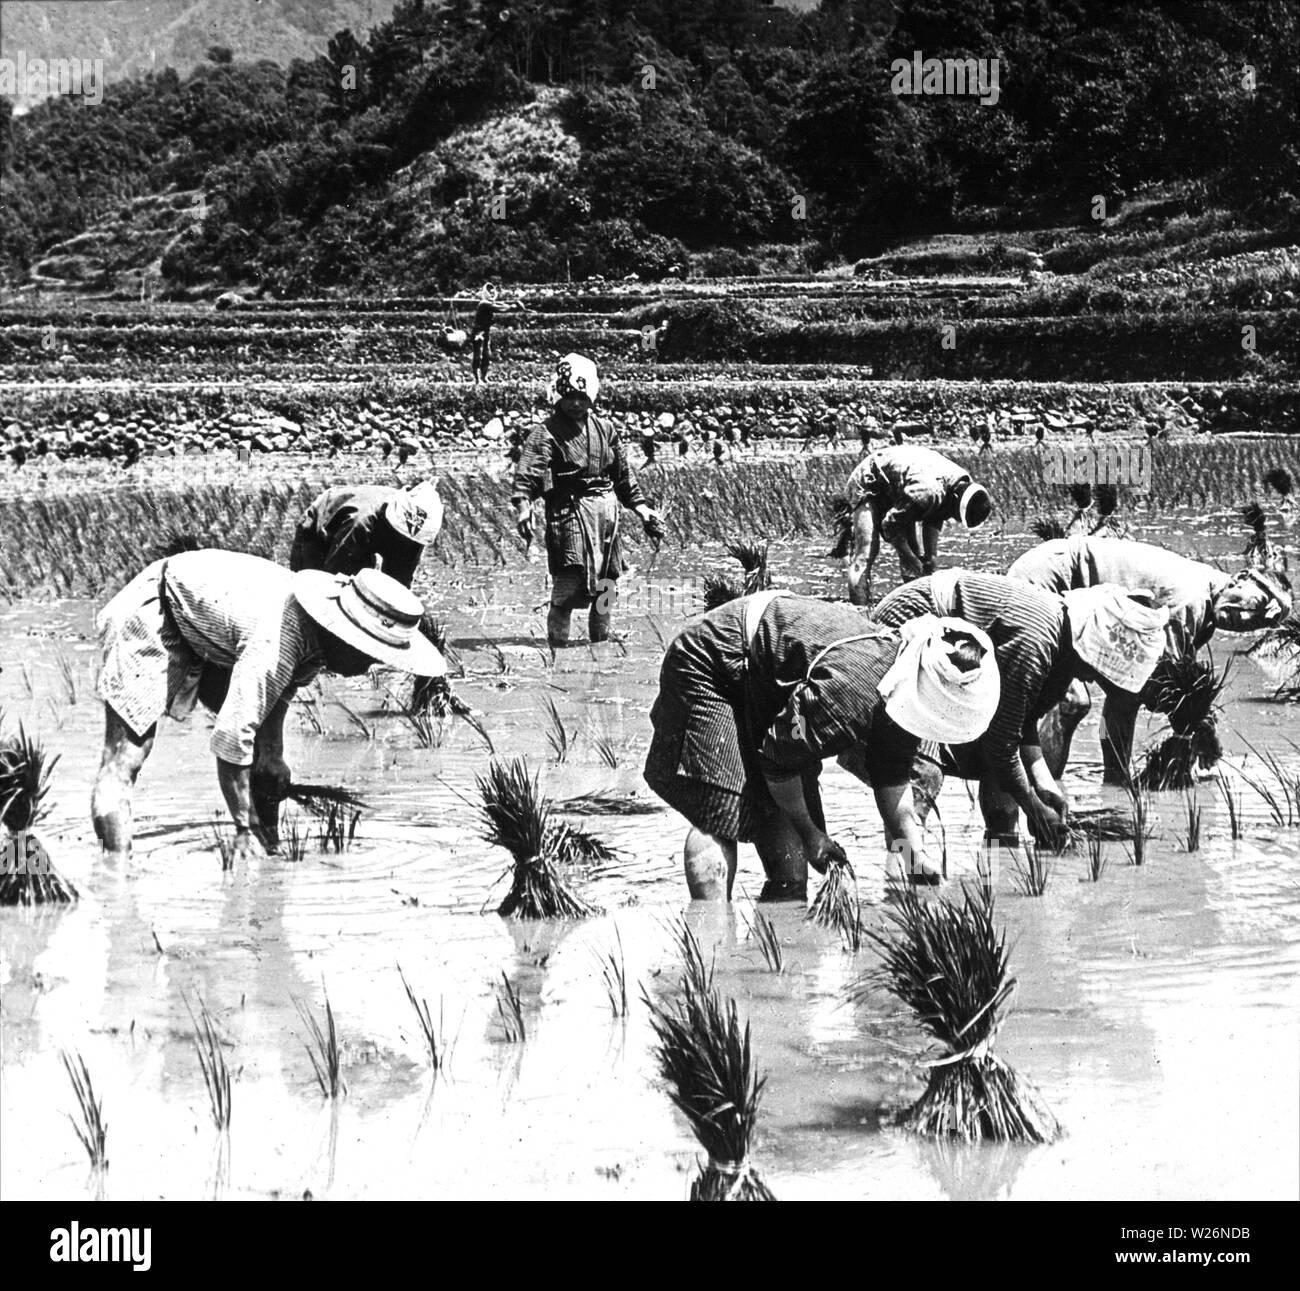 [ 1900s Japan - Japanese Farmers Planting Rice ] —   Women and men in traditional clothing are transplanting rice seedlings. This process is called taue in Japanese.  20th century vintage glass slide. Stock Photo